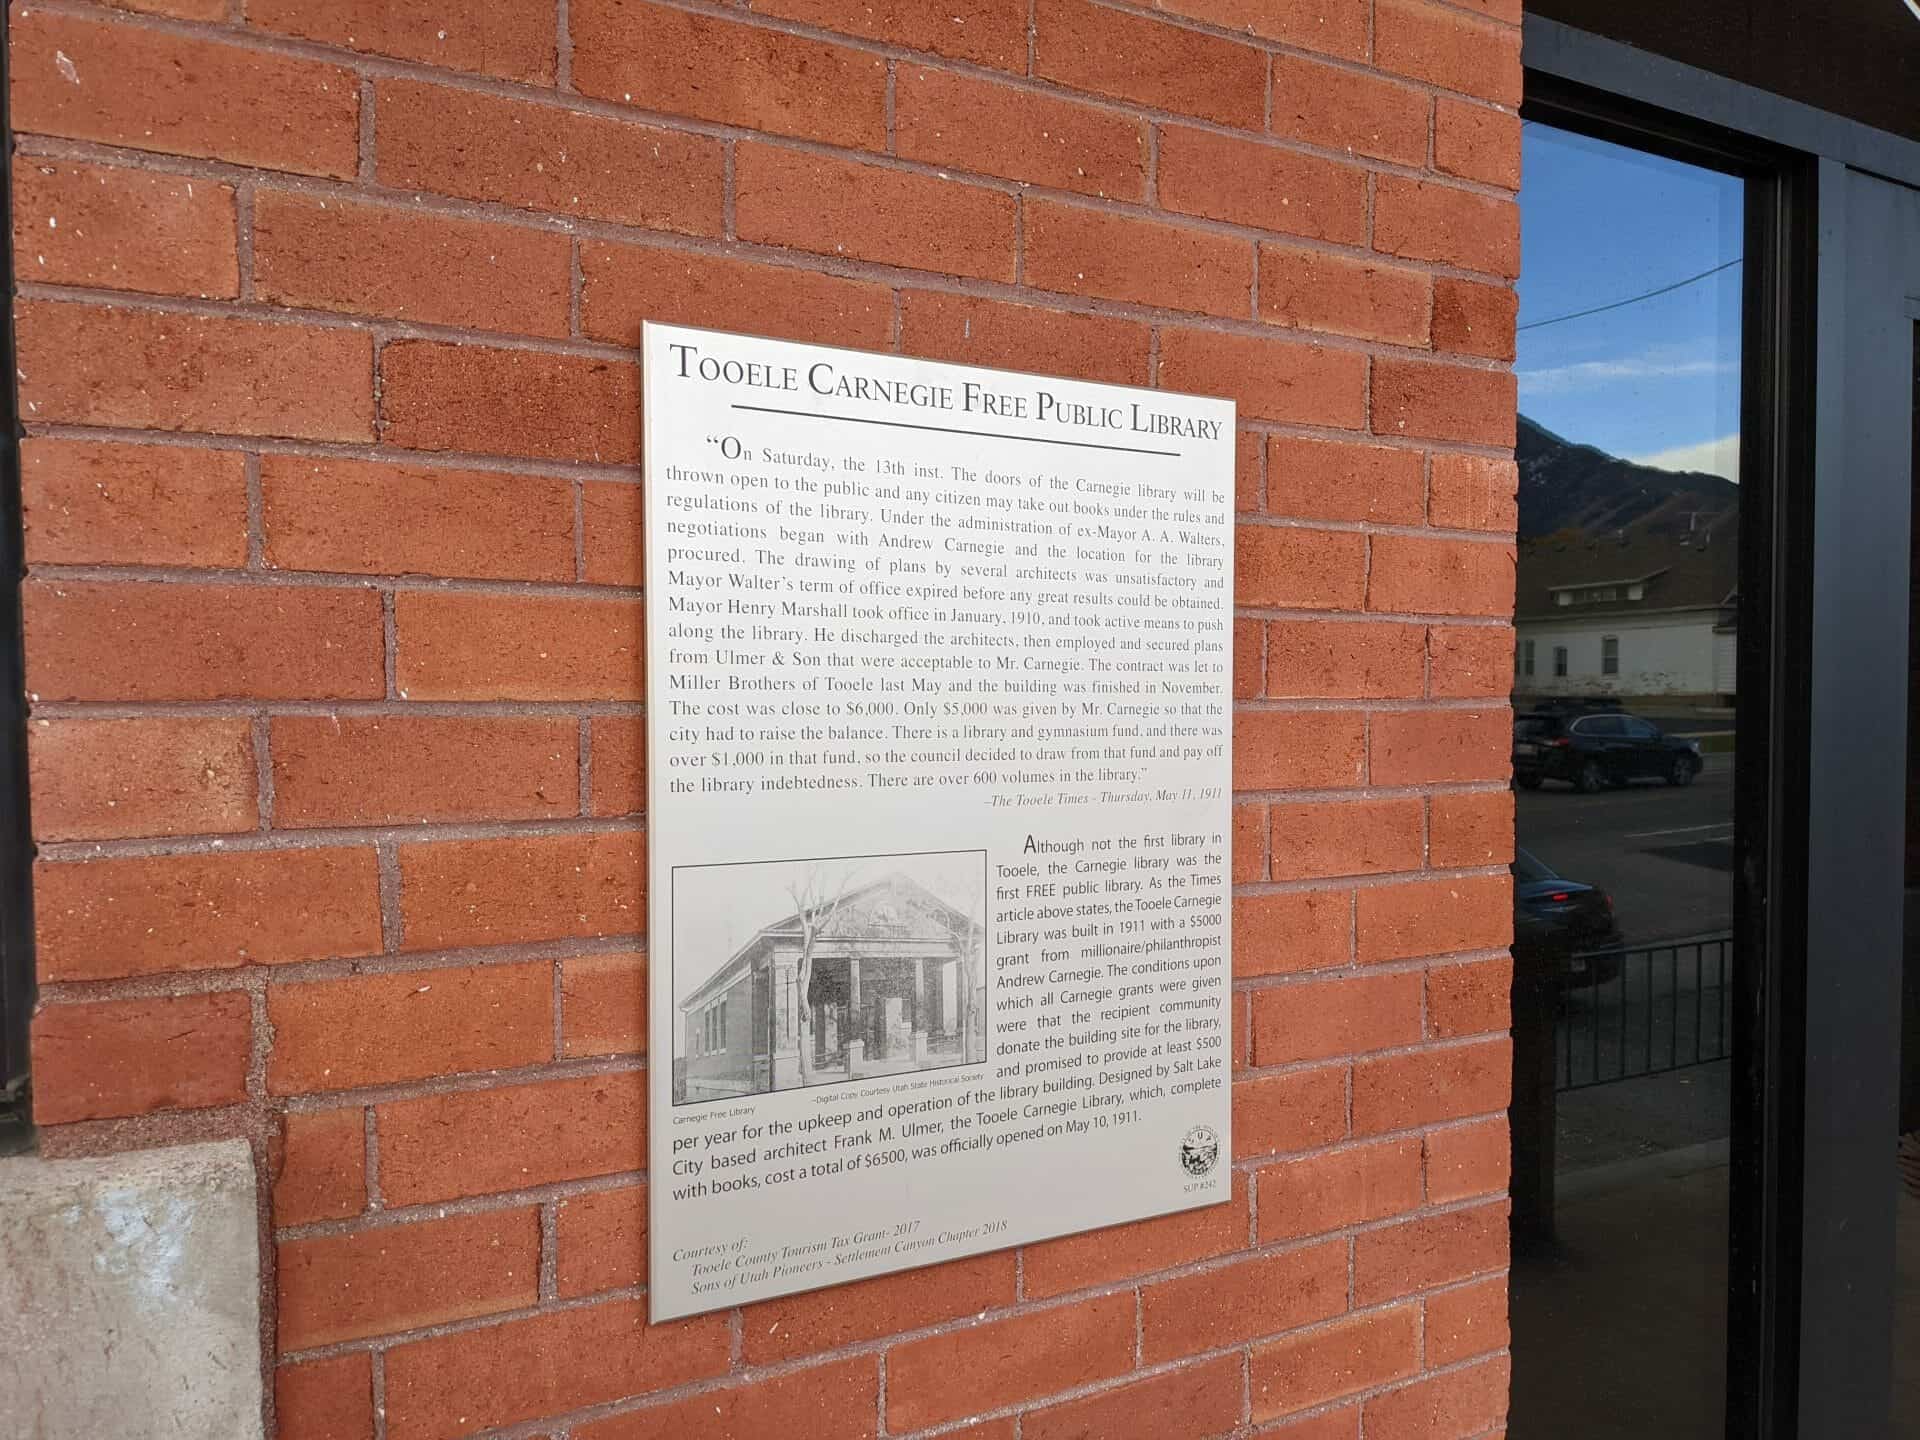 Tooele Carnegie Free Public Library